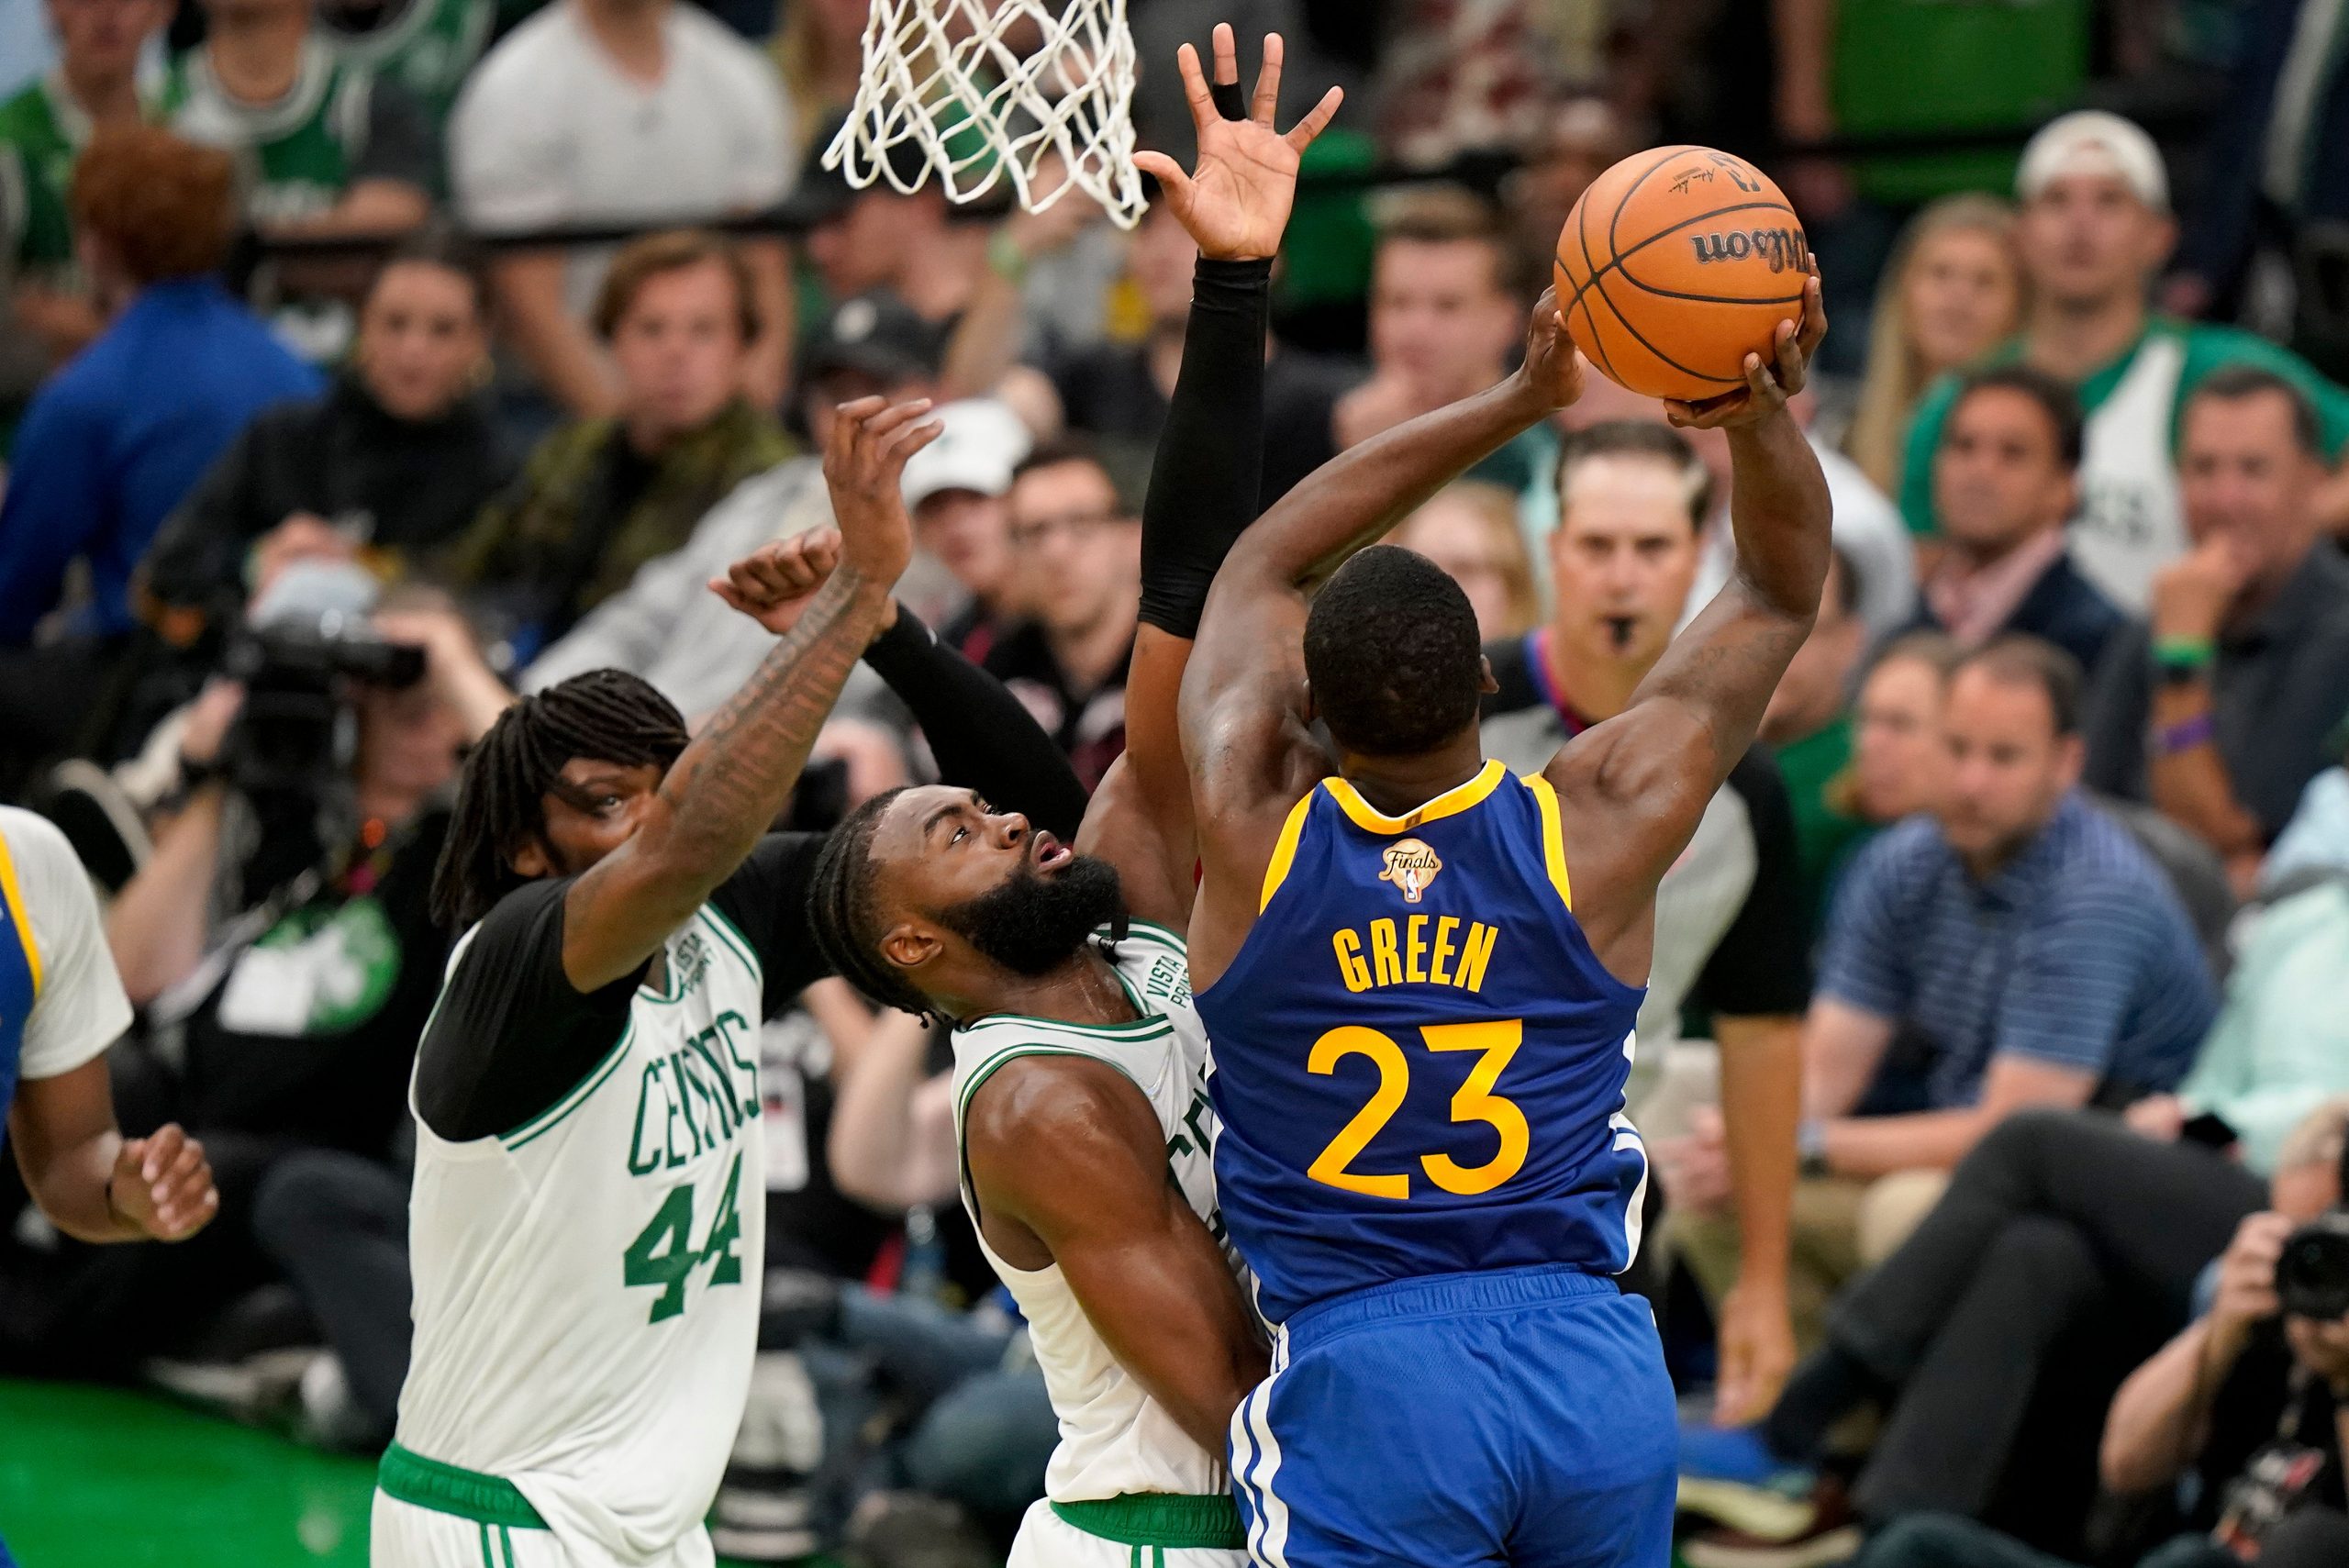 Draymond Green likely to face disciplinary action for striking Jordan Poole: Report